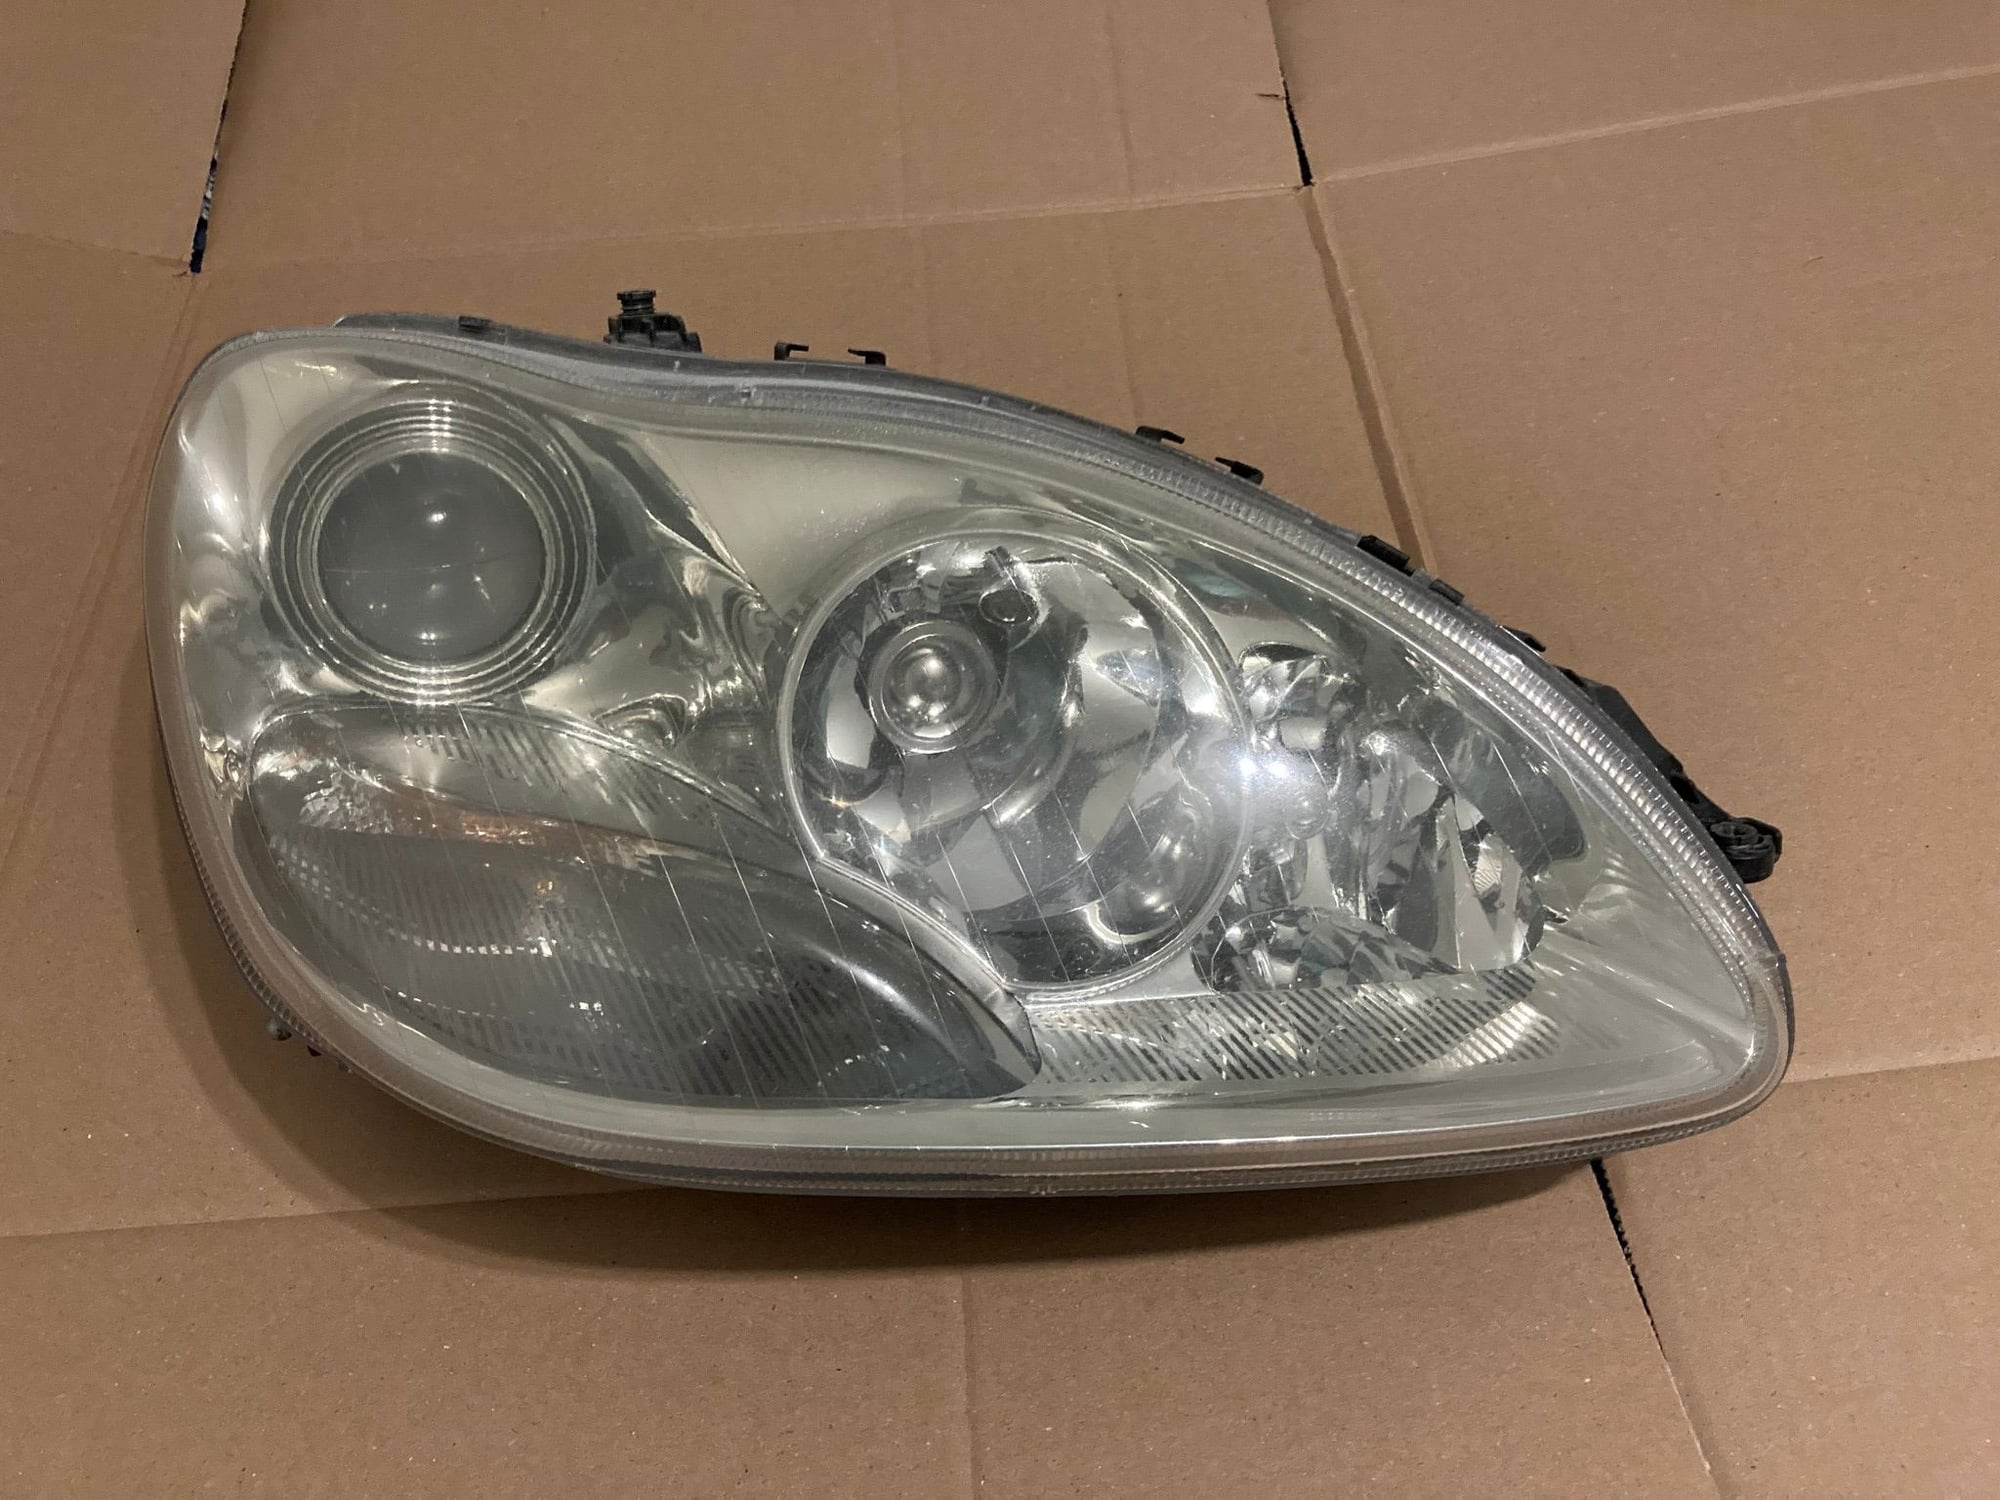 Miscellaneous - W220 Parts - Bixenon Headlights /  Steering wheel / S55 AMG M113K Performance TCU - Used - 0  All Models - Colorado Springs, CO 80920, United States